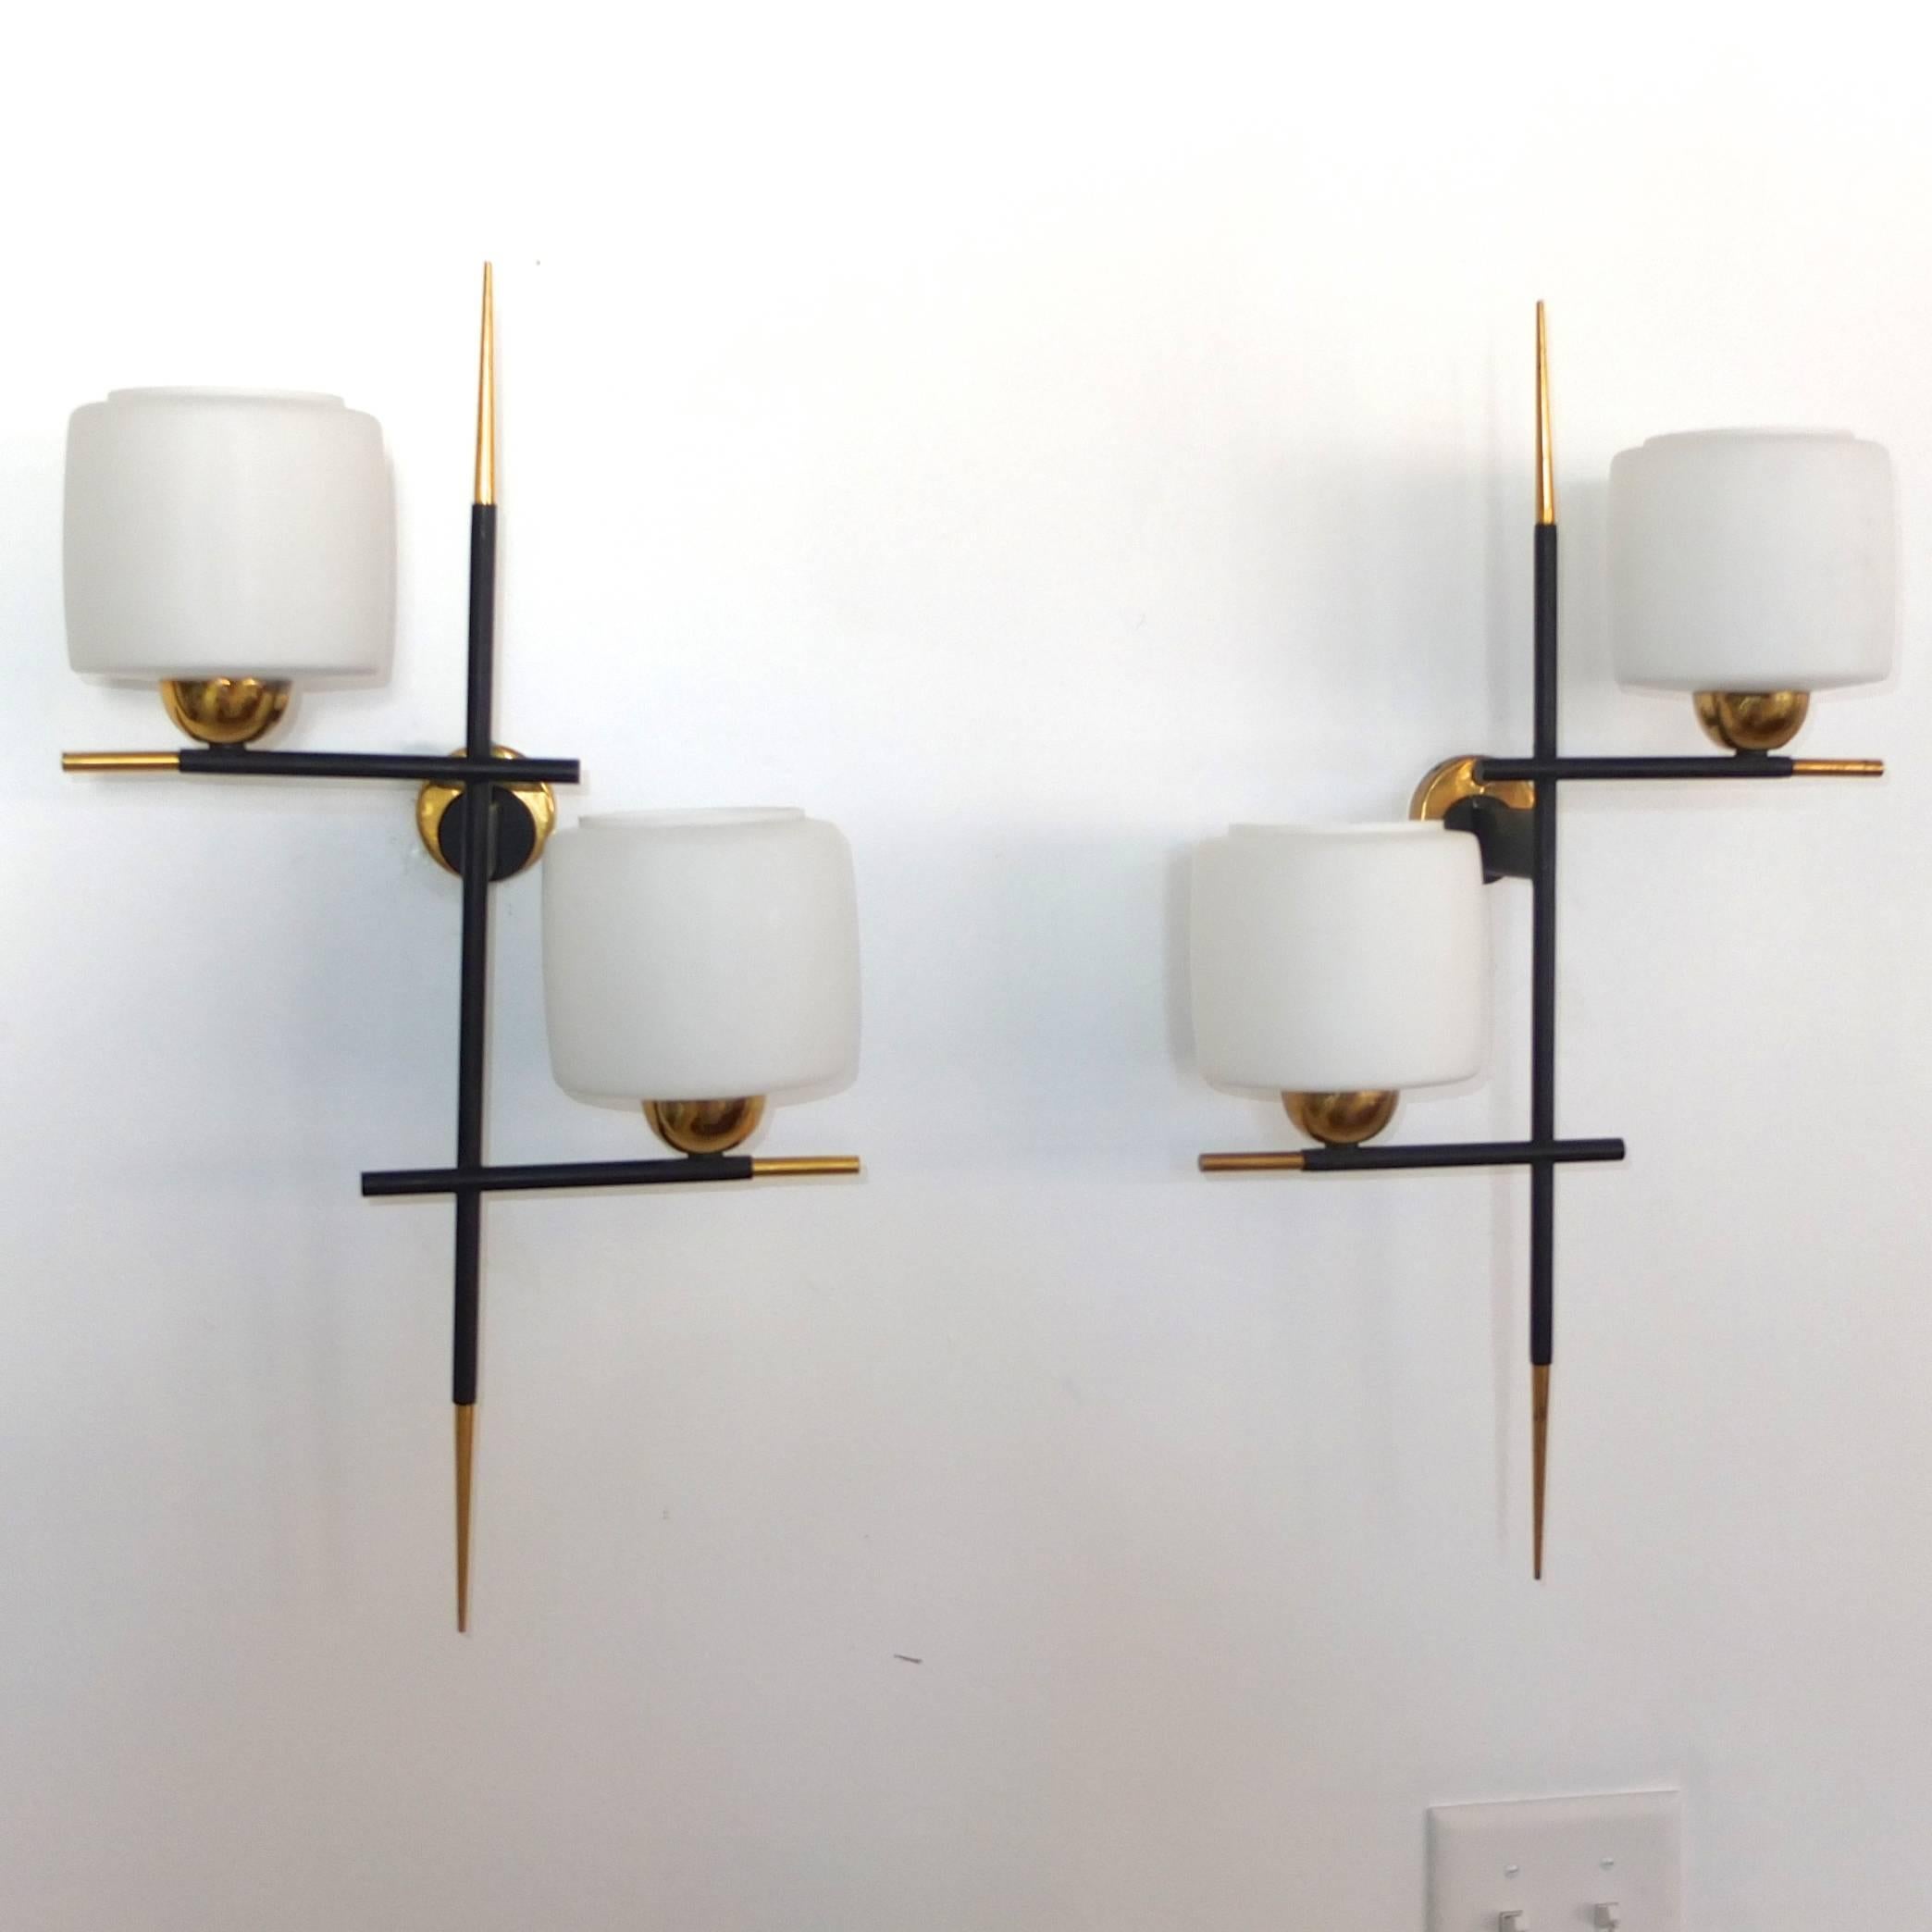 French Pair of Linear Modernist Sconces with Opaline Glass Shades by Gaston Fossati